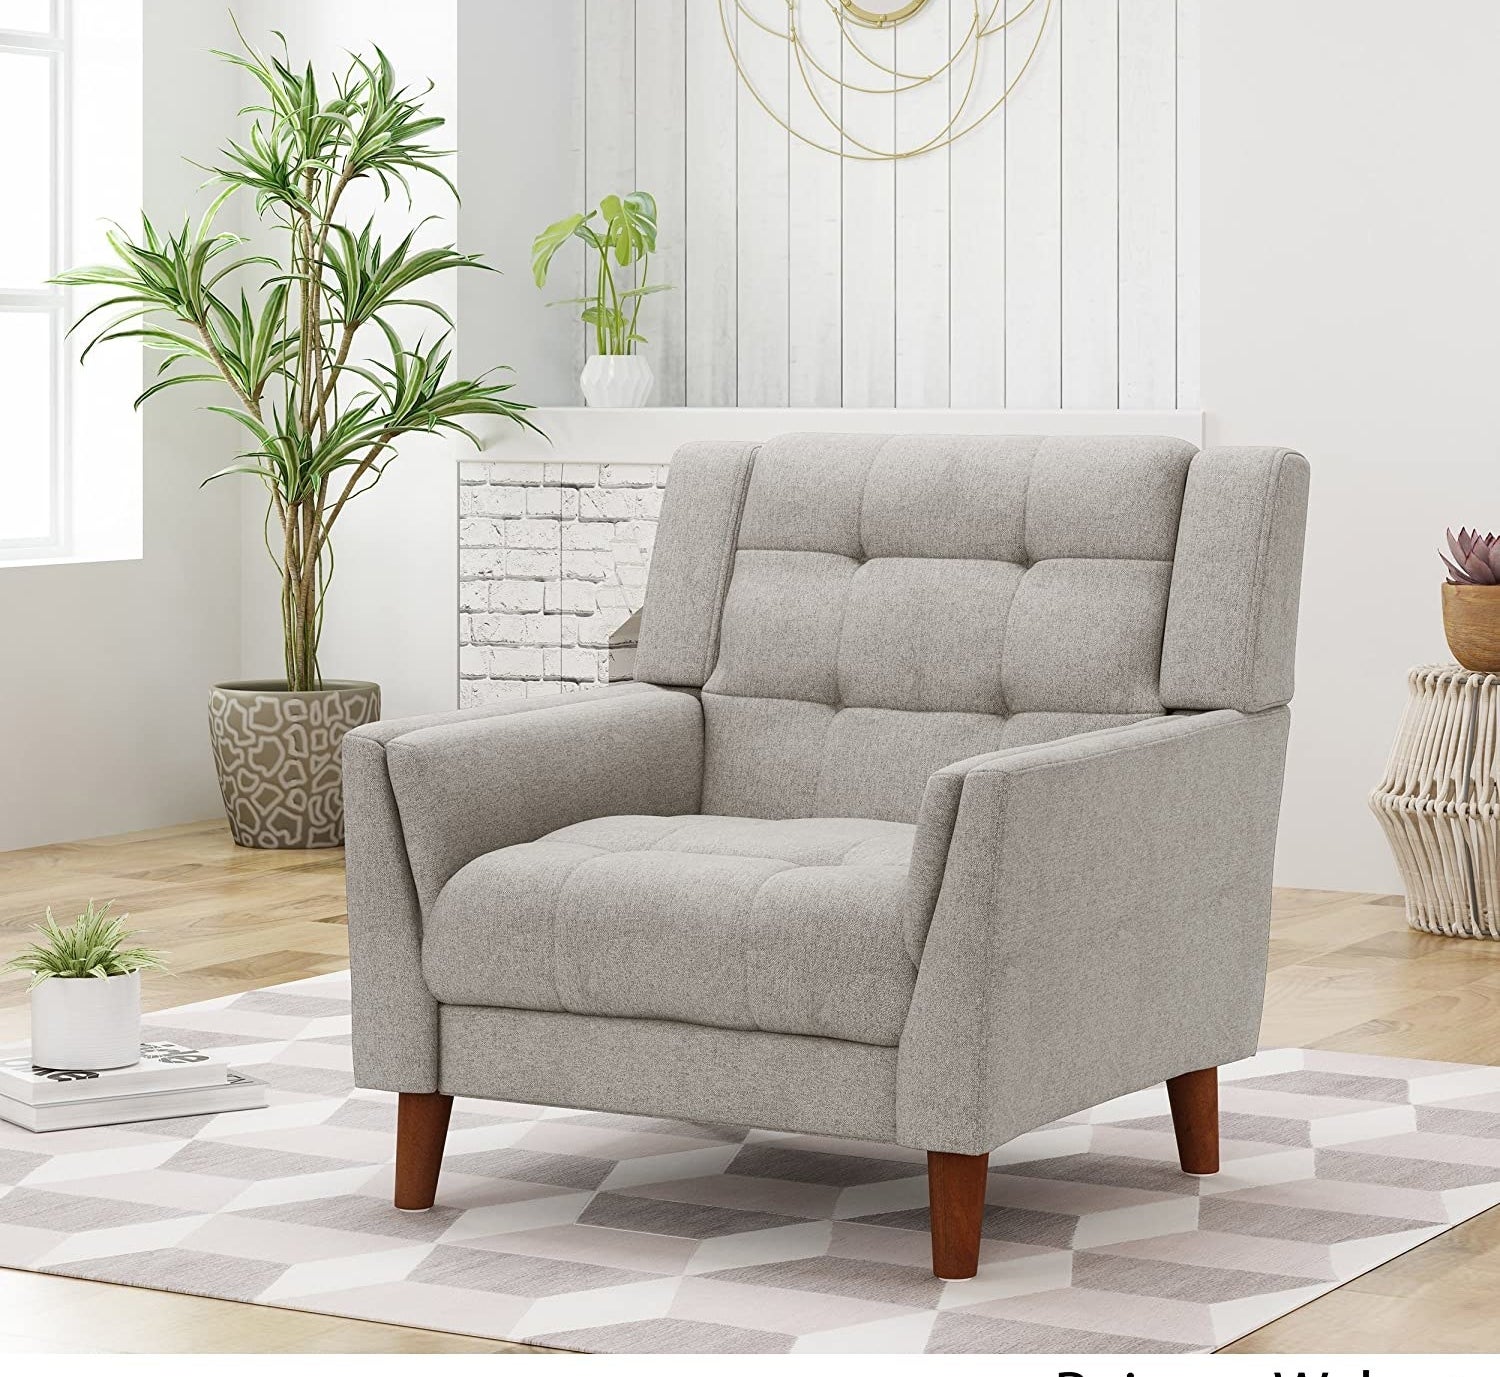 The grey tufted fabric armchair with wooden legs